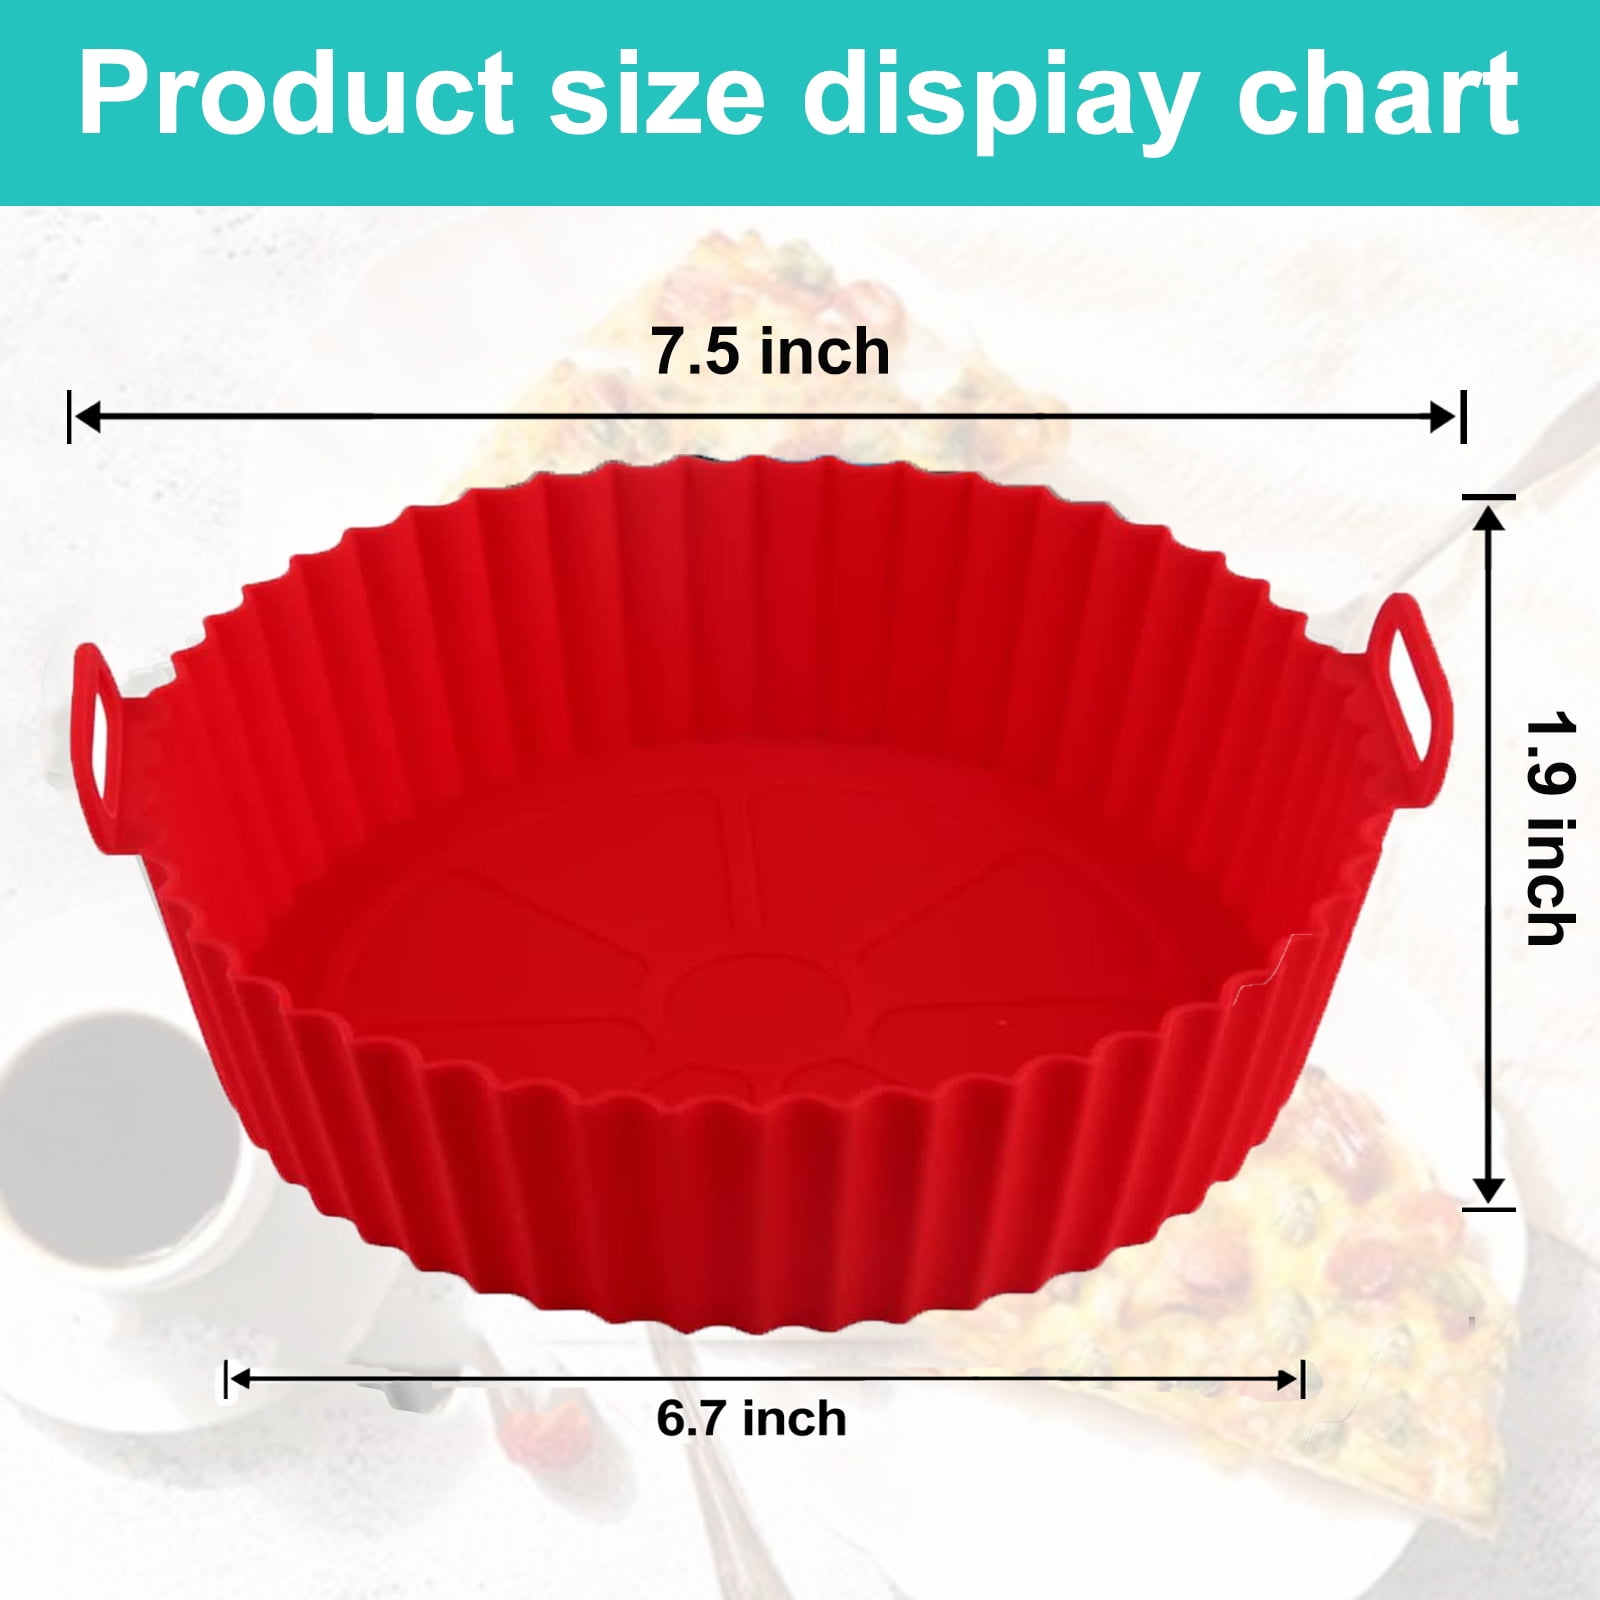 MMH 2Pcs Air Fryer Silicone Liners- Air Fryer Silicone Pot, Reusable Silicone  Airfryer Liner Replacement Baking Tray Basket Insert, Non-stick， Easy  Cleaning， Food Safe， Black 